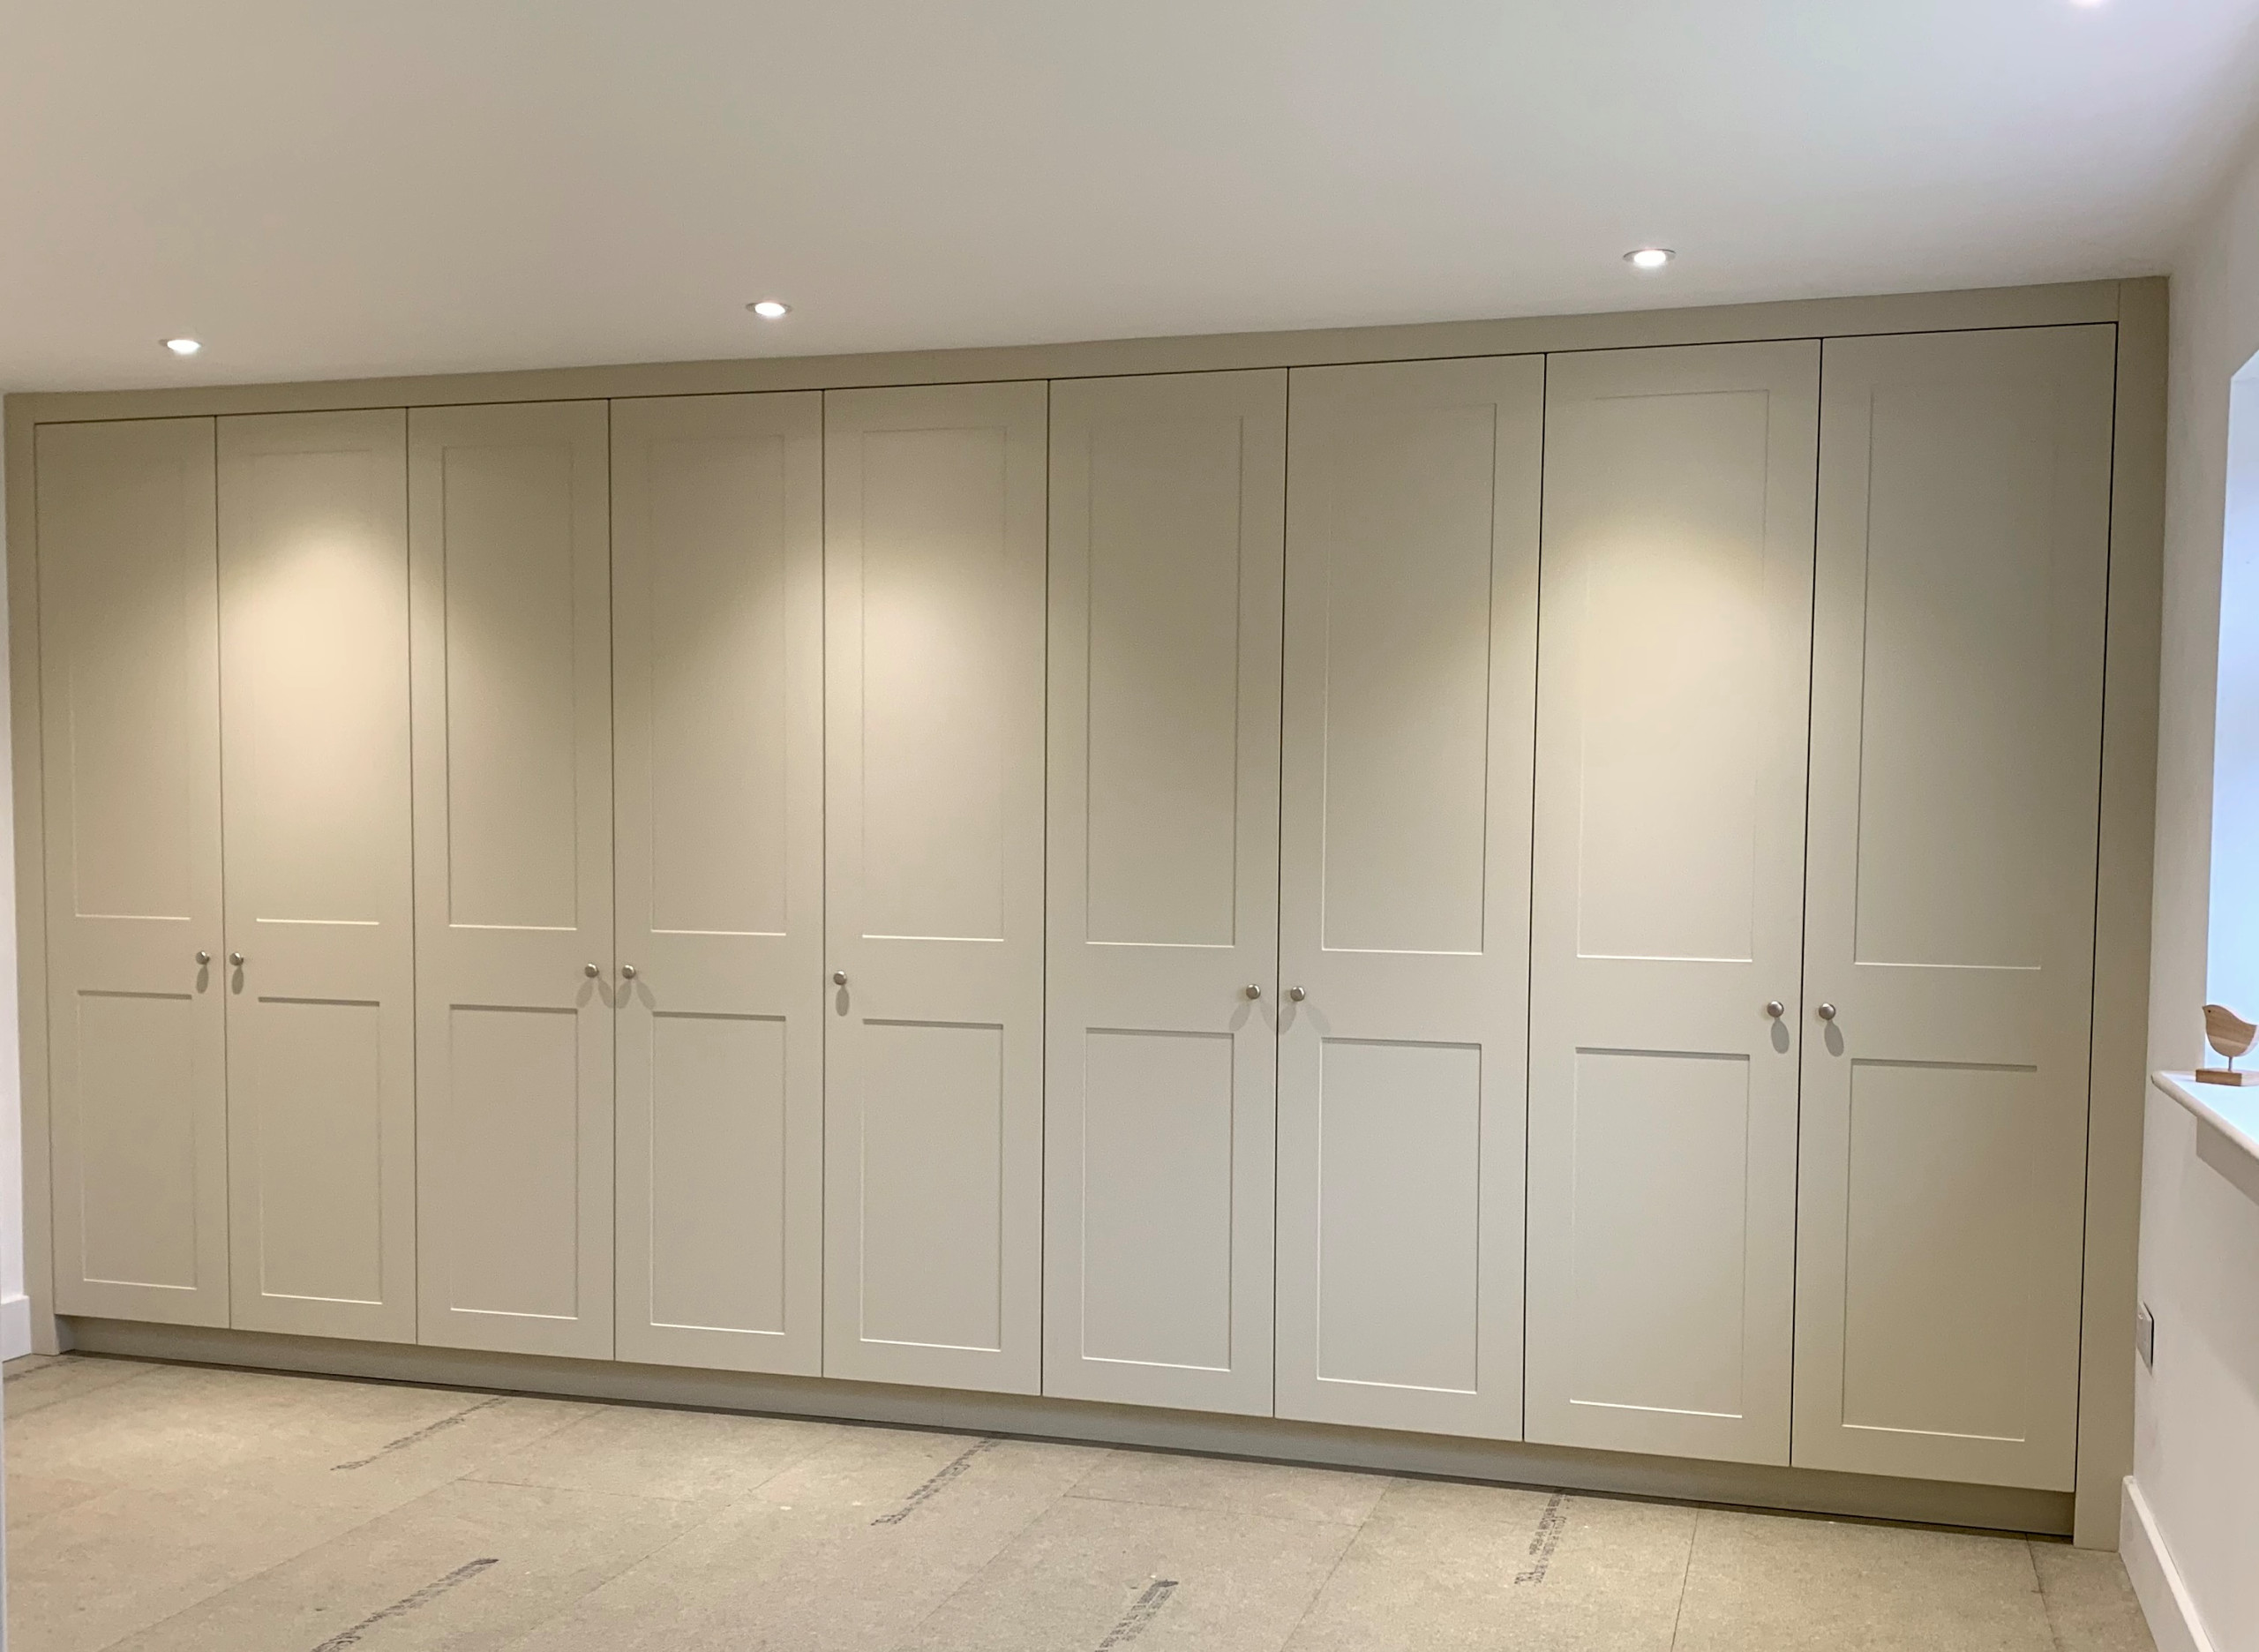 Bespoke Fitted Wardrobes in 'Mussell' Colour